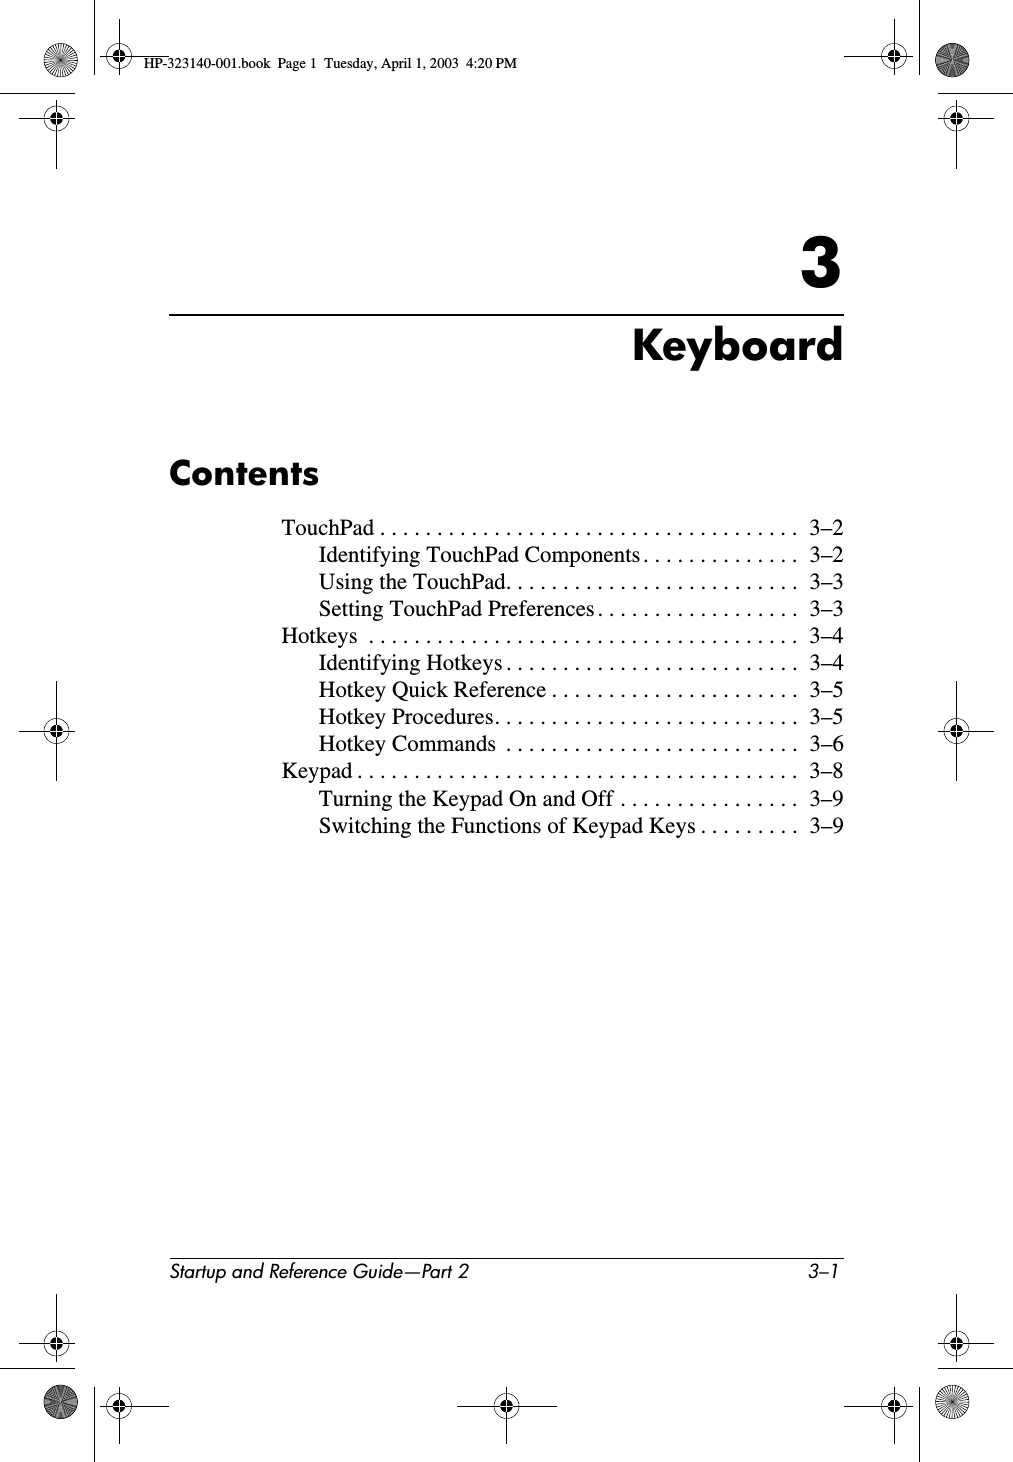 Startup and Reference Guide—Part 2 3–13KeyboardContentsTouchPad . . . . . . . . . . . . . . . . . . . . . . . . . . . . . . . . . . . . .  3–2Identifying TouchPad Components . . . . . . . . . . . . . .  3–2Using the TouchPad. . . . . . . . . . . . . . . . . . . . . . . . . .  3–3Setting TouchPad Preferences . . . . . . . . . . . . . . . . . .  3–3Hotkeys  . . . . . . . . . . . . . . . . . . . . . . . . . . . . . . . . . . . . . .  3–4Identifying Hotkeys . . . . . . . . . . . . . . . . . . . . . . . . . .  3–4Hotkey Quick Reference . . . . . . . . . . . . . . . . . . . . . .  3–5Hotkey Procedures. . . . . . . . . . . . . . . . . . . . . . . . . . .  3–5Hotkey Commands  . . . . . . . . . . . . . . . . . . . . . . . . . .  3–6Keypad . . . . . . . . . . . . . . . . . . . . . . . . . . . . . . . . . . . . . . .  3–8Turning the Keypad On and Off . . . . . . . . . . . . . . . .  3–9Switching the Functions of Keypad Keys . . . . . . . . .  3–9HP-323140-001.book  Page 1  Tuesday, April 1, 2003  4:20 PM